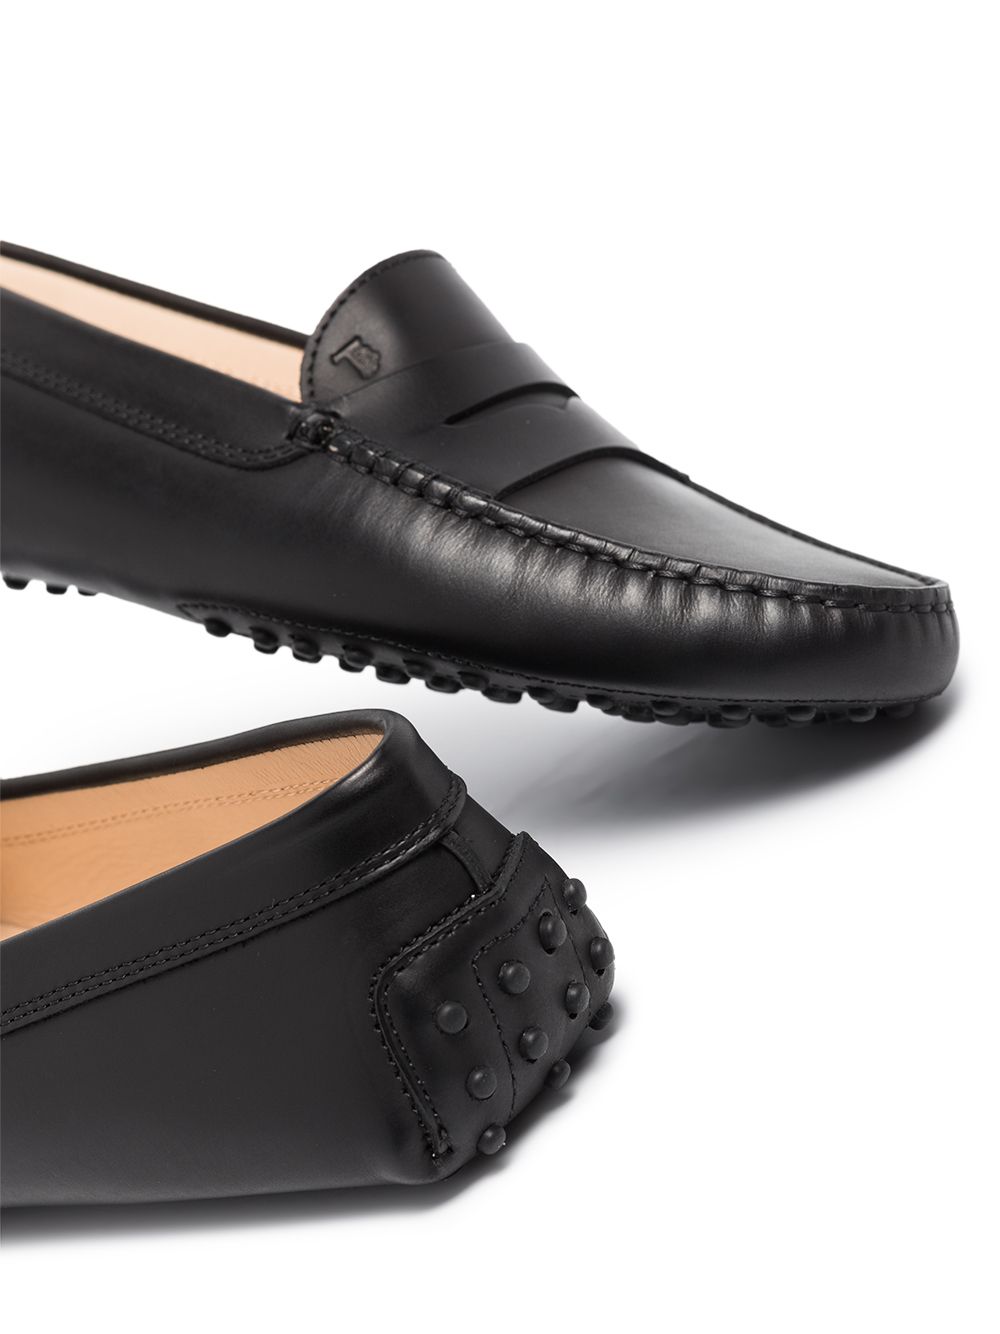 Black leather Gommino round toe moccasins